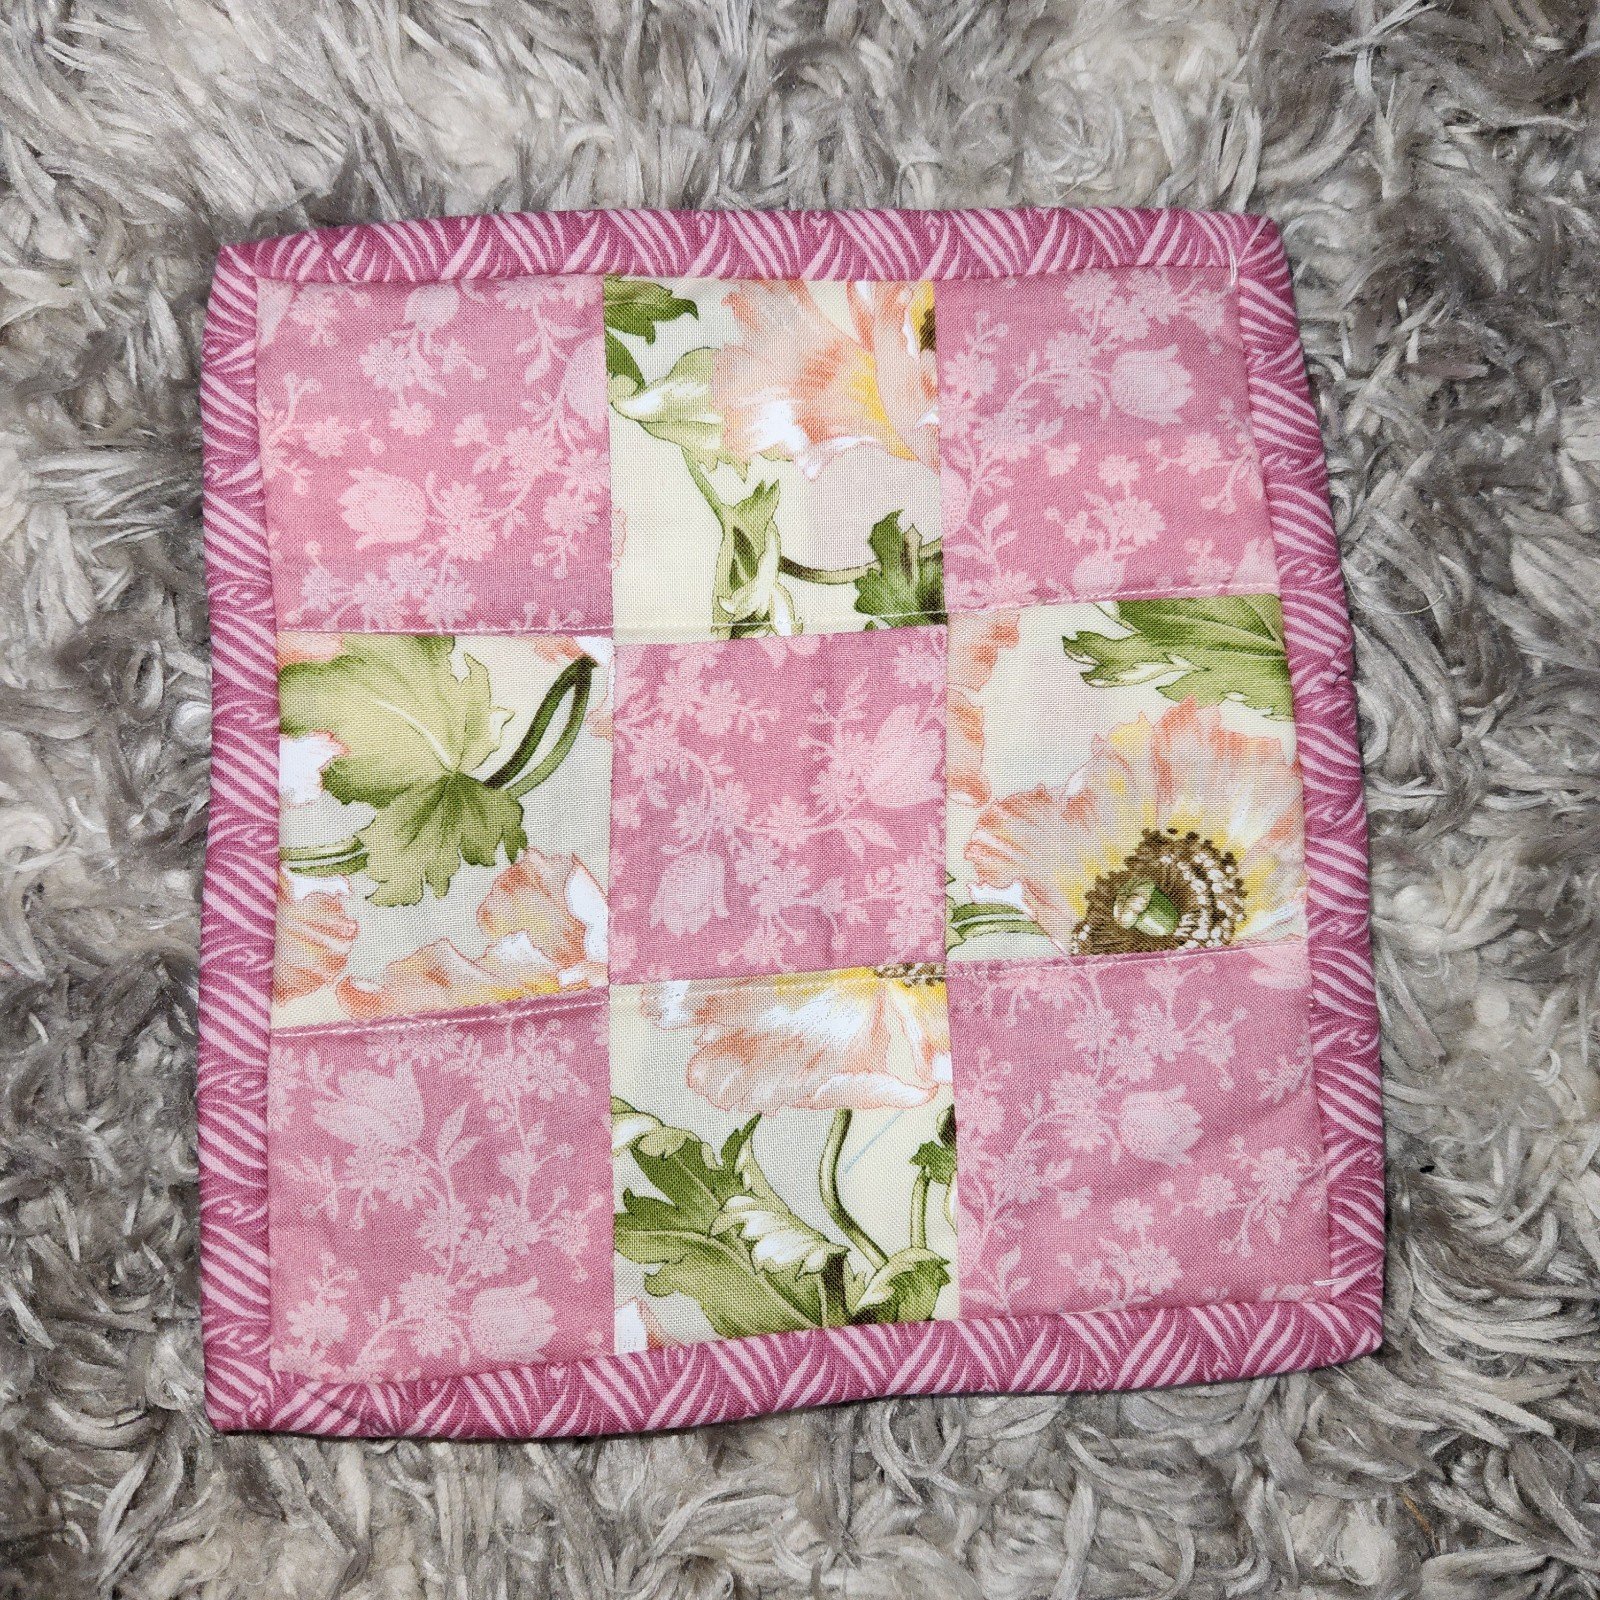 Quilted Patchwork Wall Hanging Floral 8x8 Inches 7N8LOG